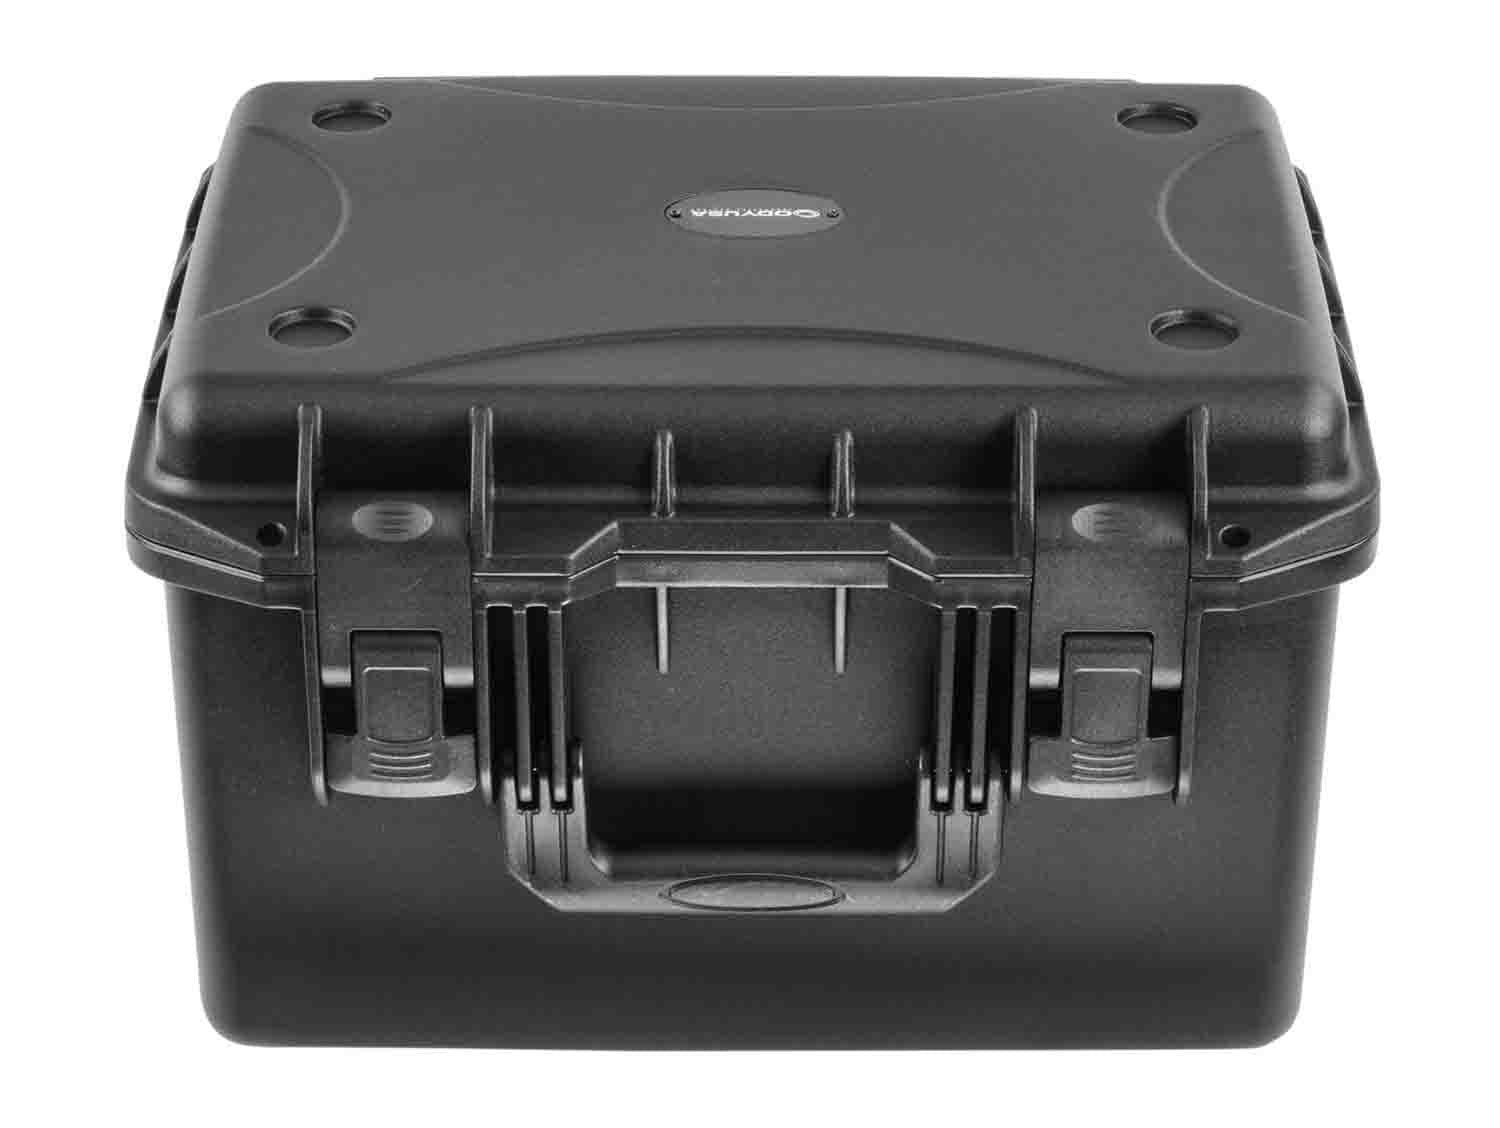 Odyssey VU151010NF Vulcan Injection-Molded Utility Case - 15 x 10.5 x 8.25" Interior - Hollywood DJ